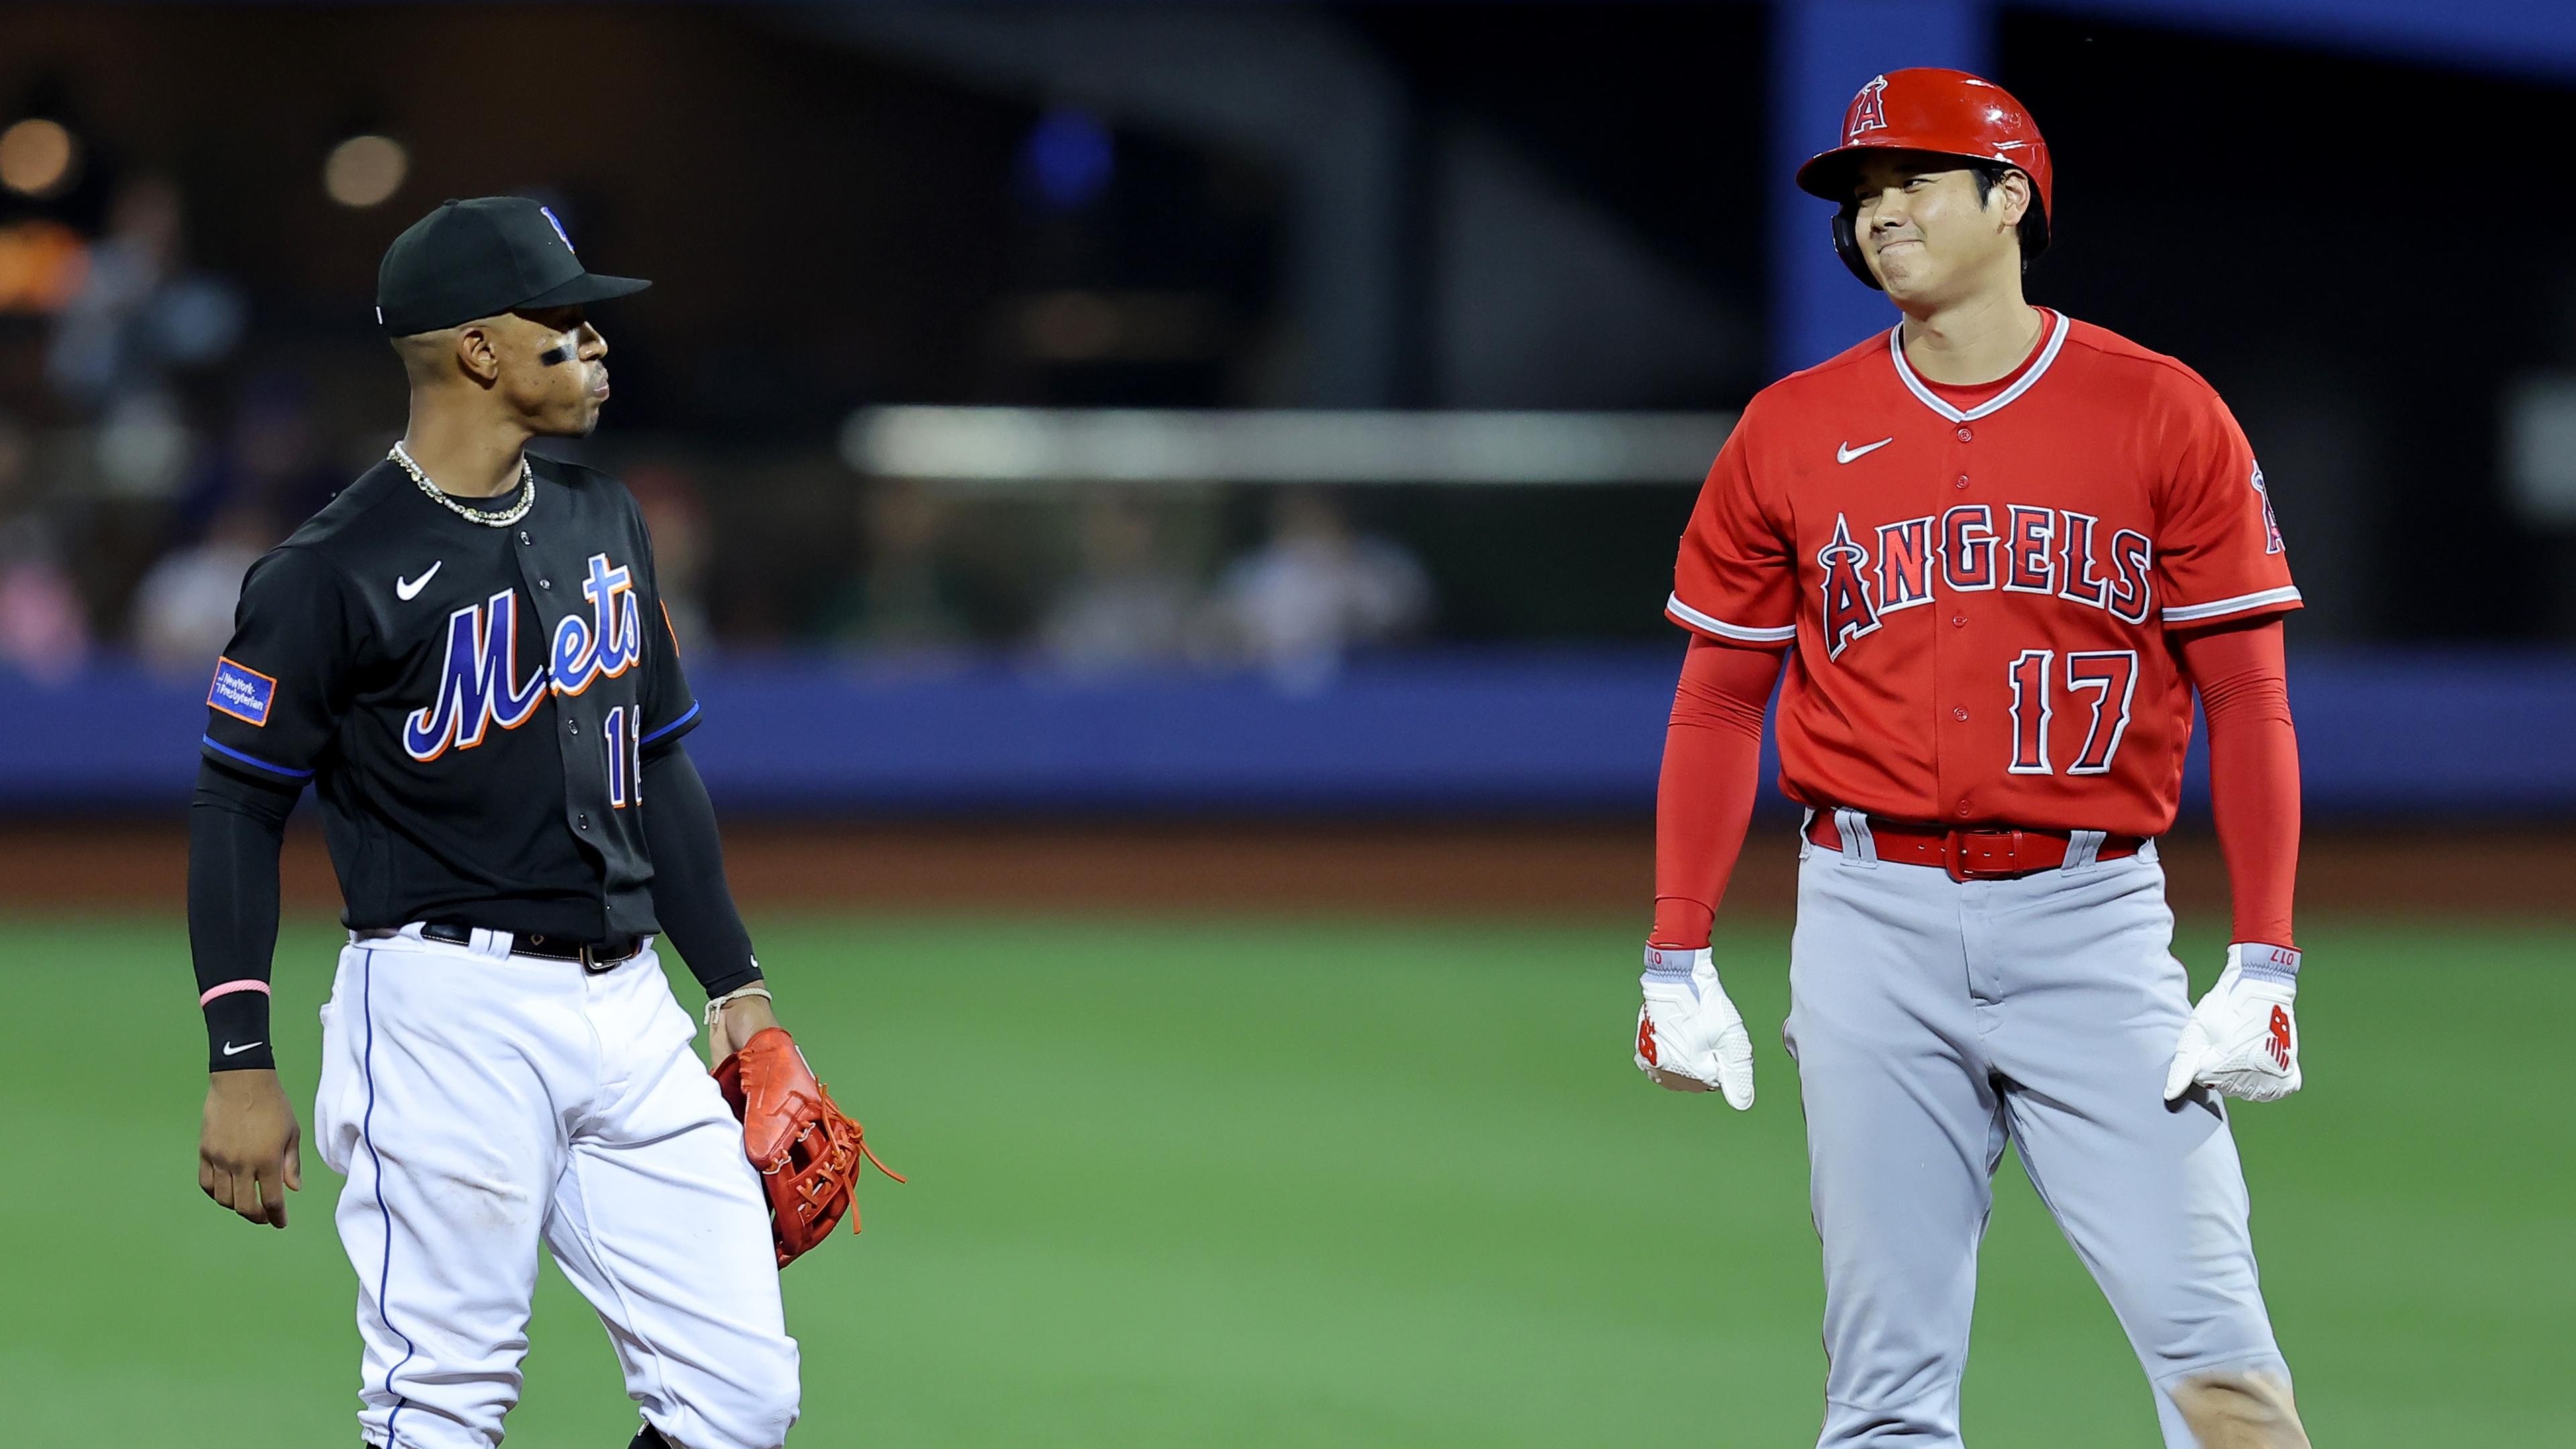 Los Angeles Angels designated hitter Shohei Ohtani (17) talks to New York Mets shortstop Francisco Lindor (12) at second base during the fifth inning at Citi Field / Brad Penner - USA TODAY Sports